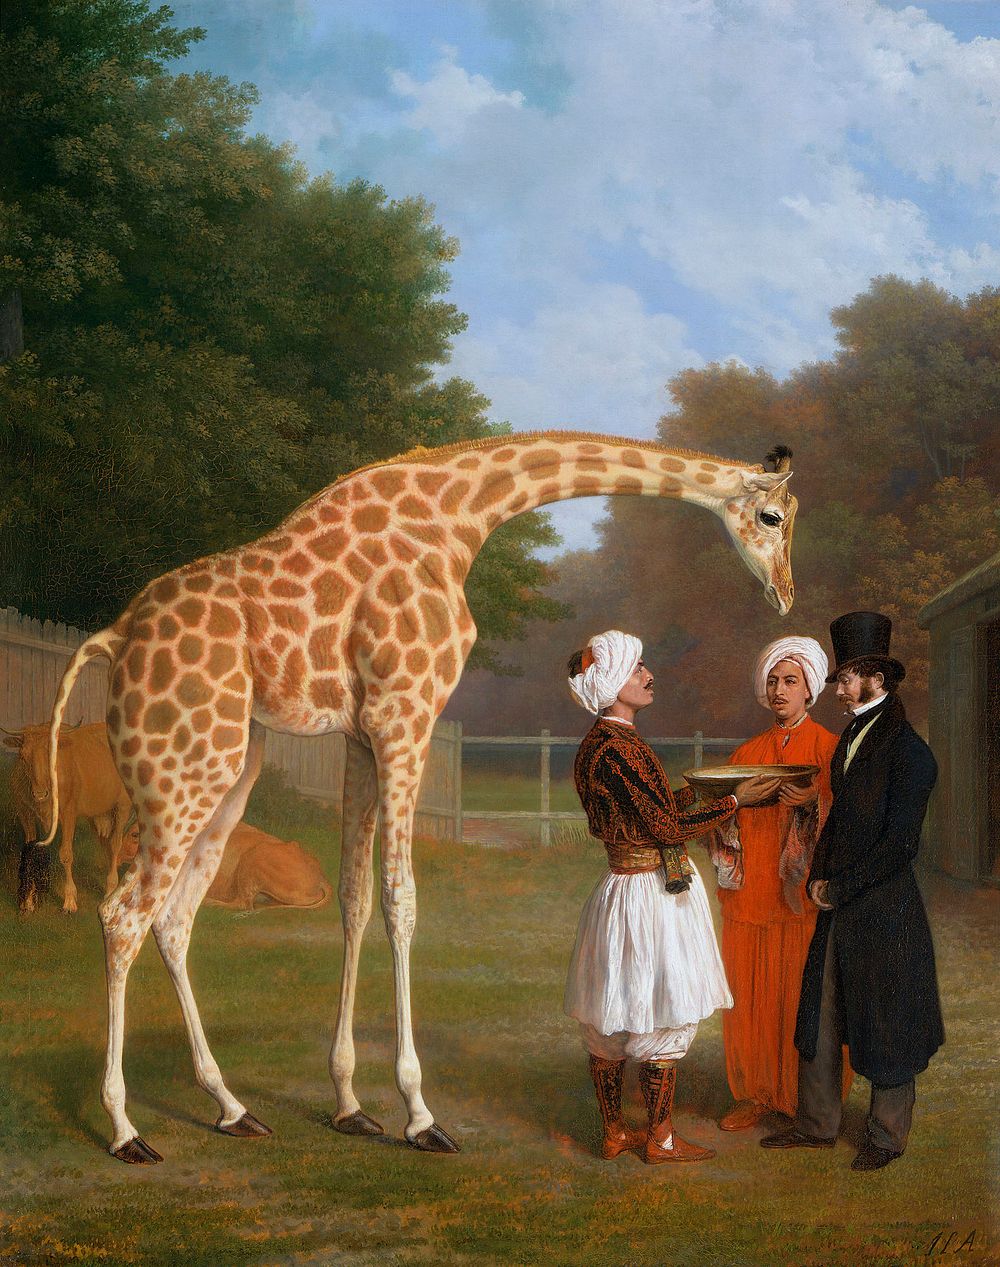 The nubian giraffe (1827) by Jacques-Laurent Agasse